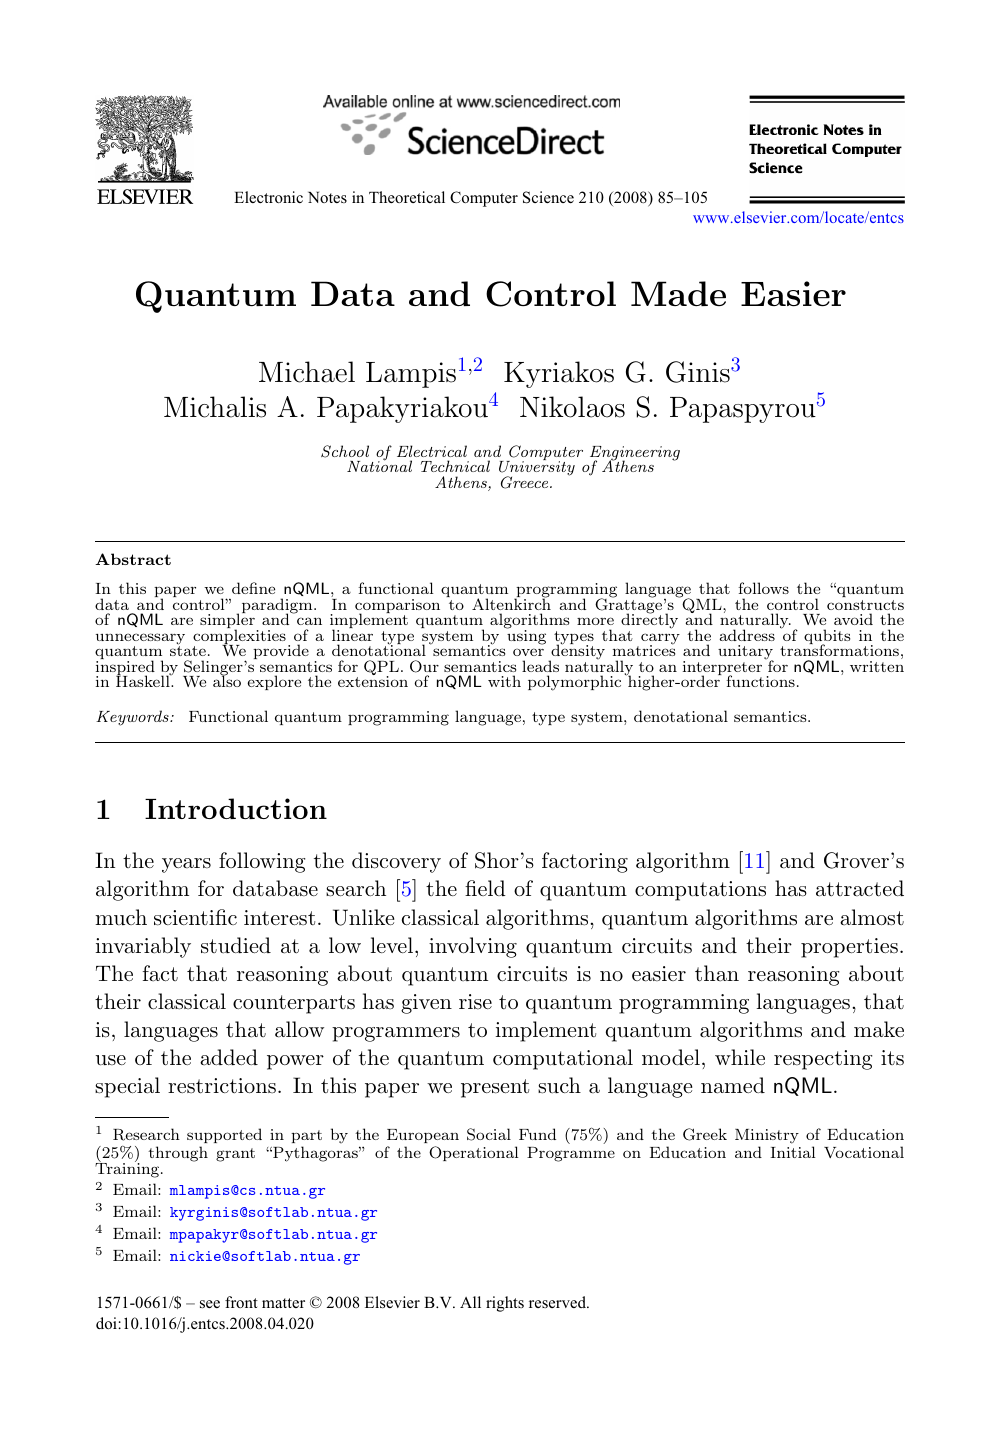 Quantum Data And Control Made Easier Topic Of Research Paper In Computer And Information Sciences Download Scholarly Article Pdf And Read For Free On Cyberleninka Open Science Hub